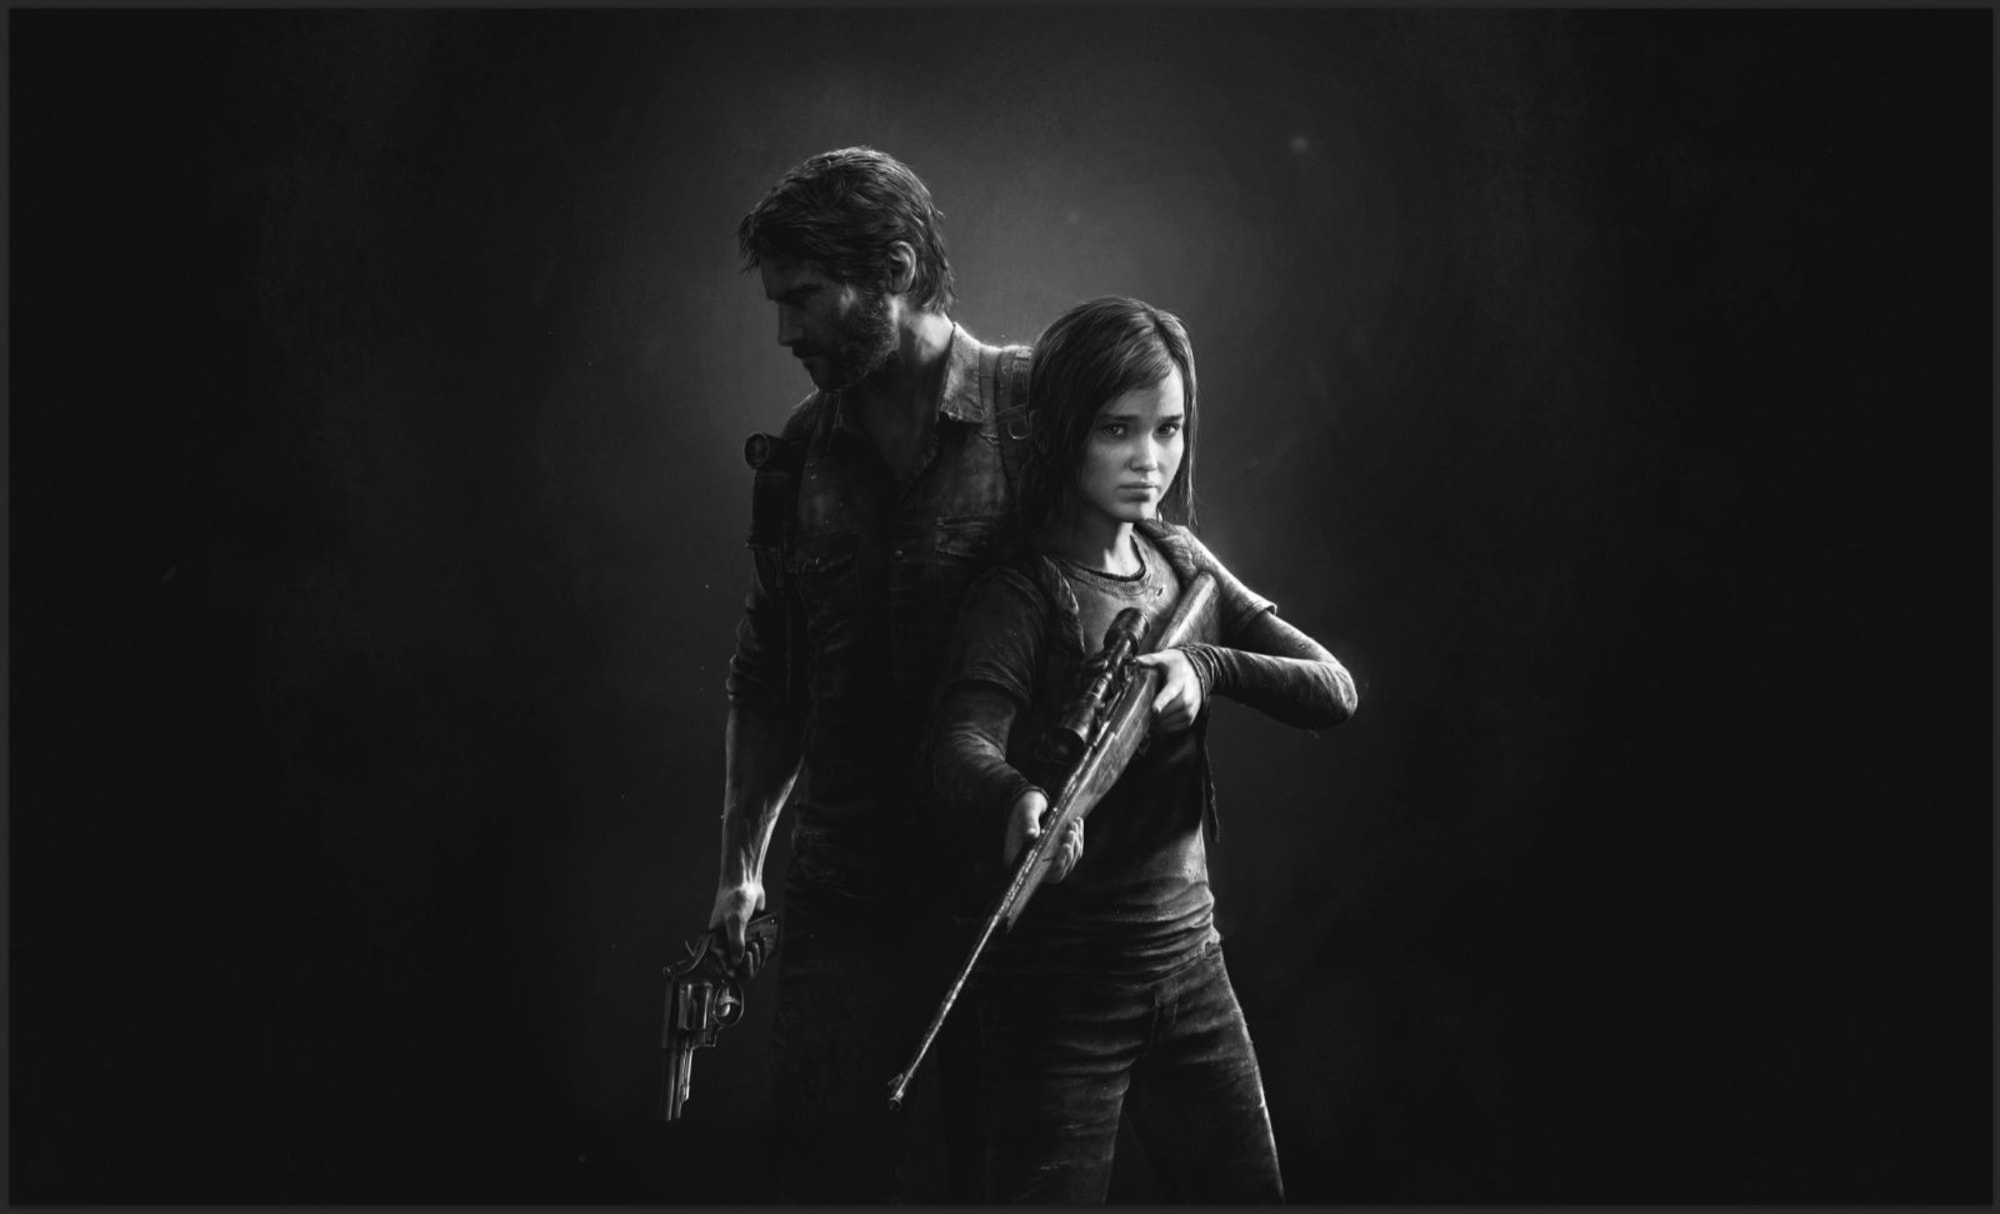 The Last of Us Finally Reveals How Ellie Is Immune